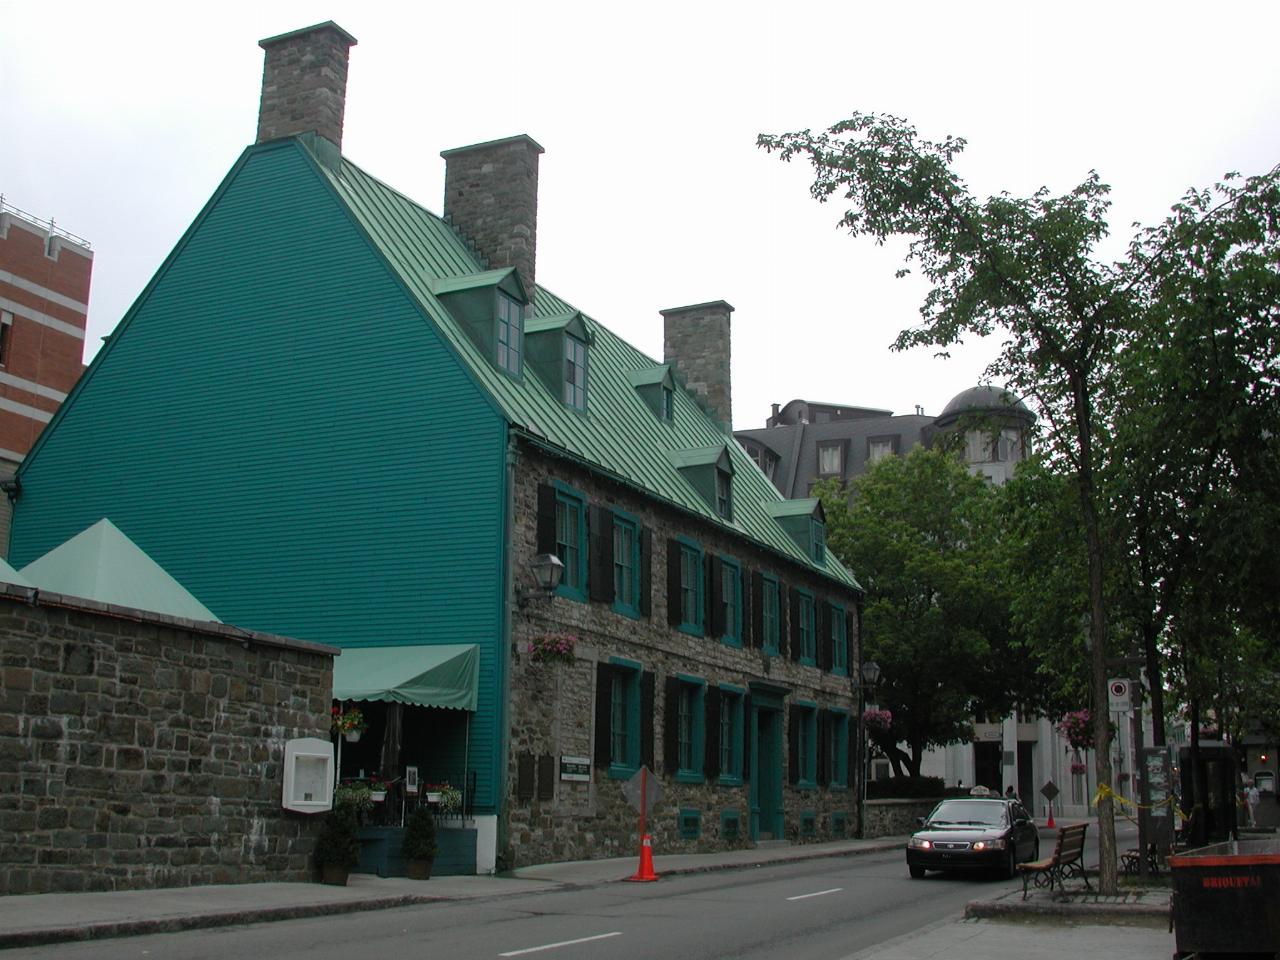 A building along Rue St. Louis - a typical style of old building